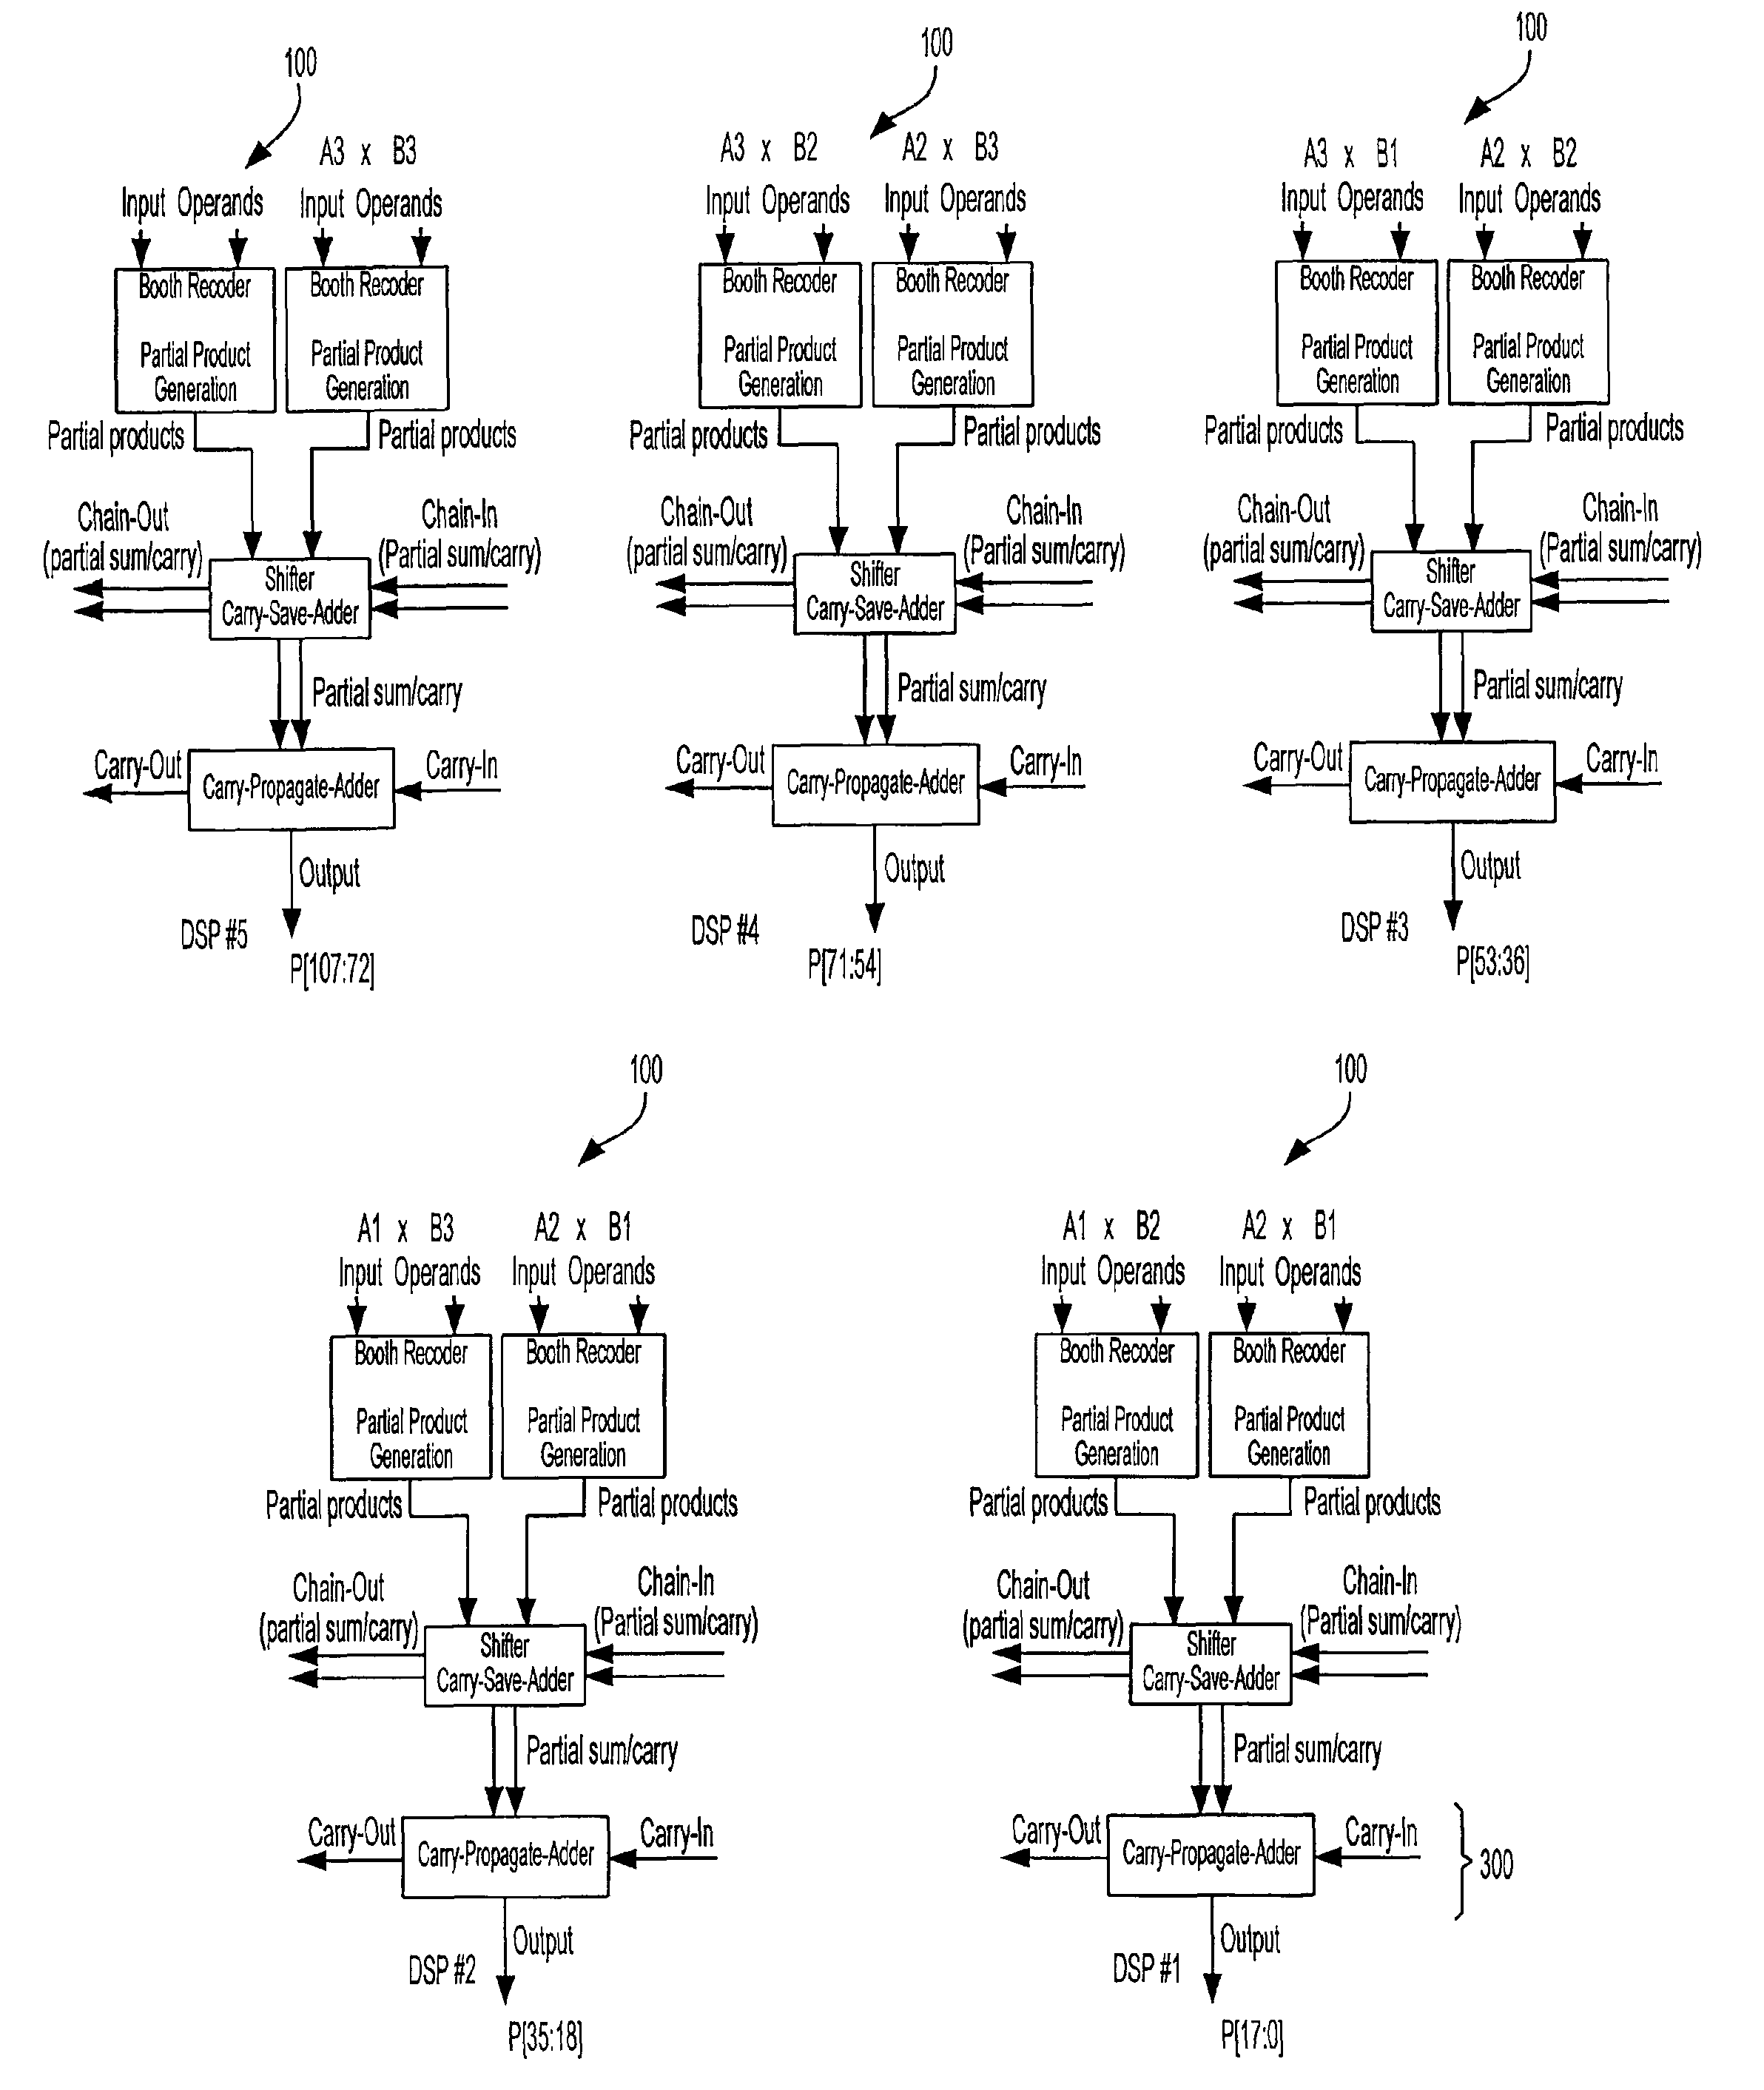 DSP block for implementing large multiplier on a programmable integrated circuit device